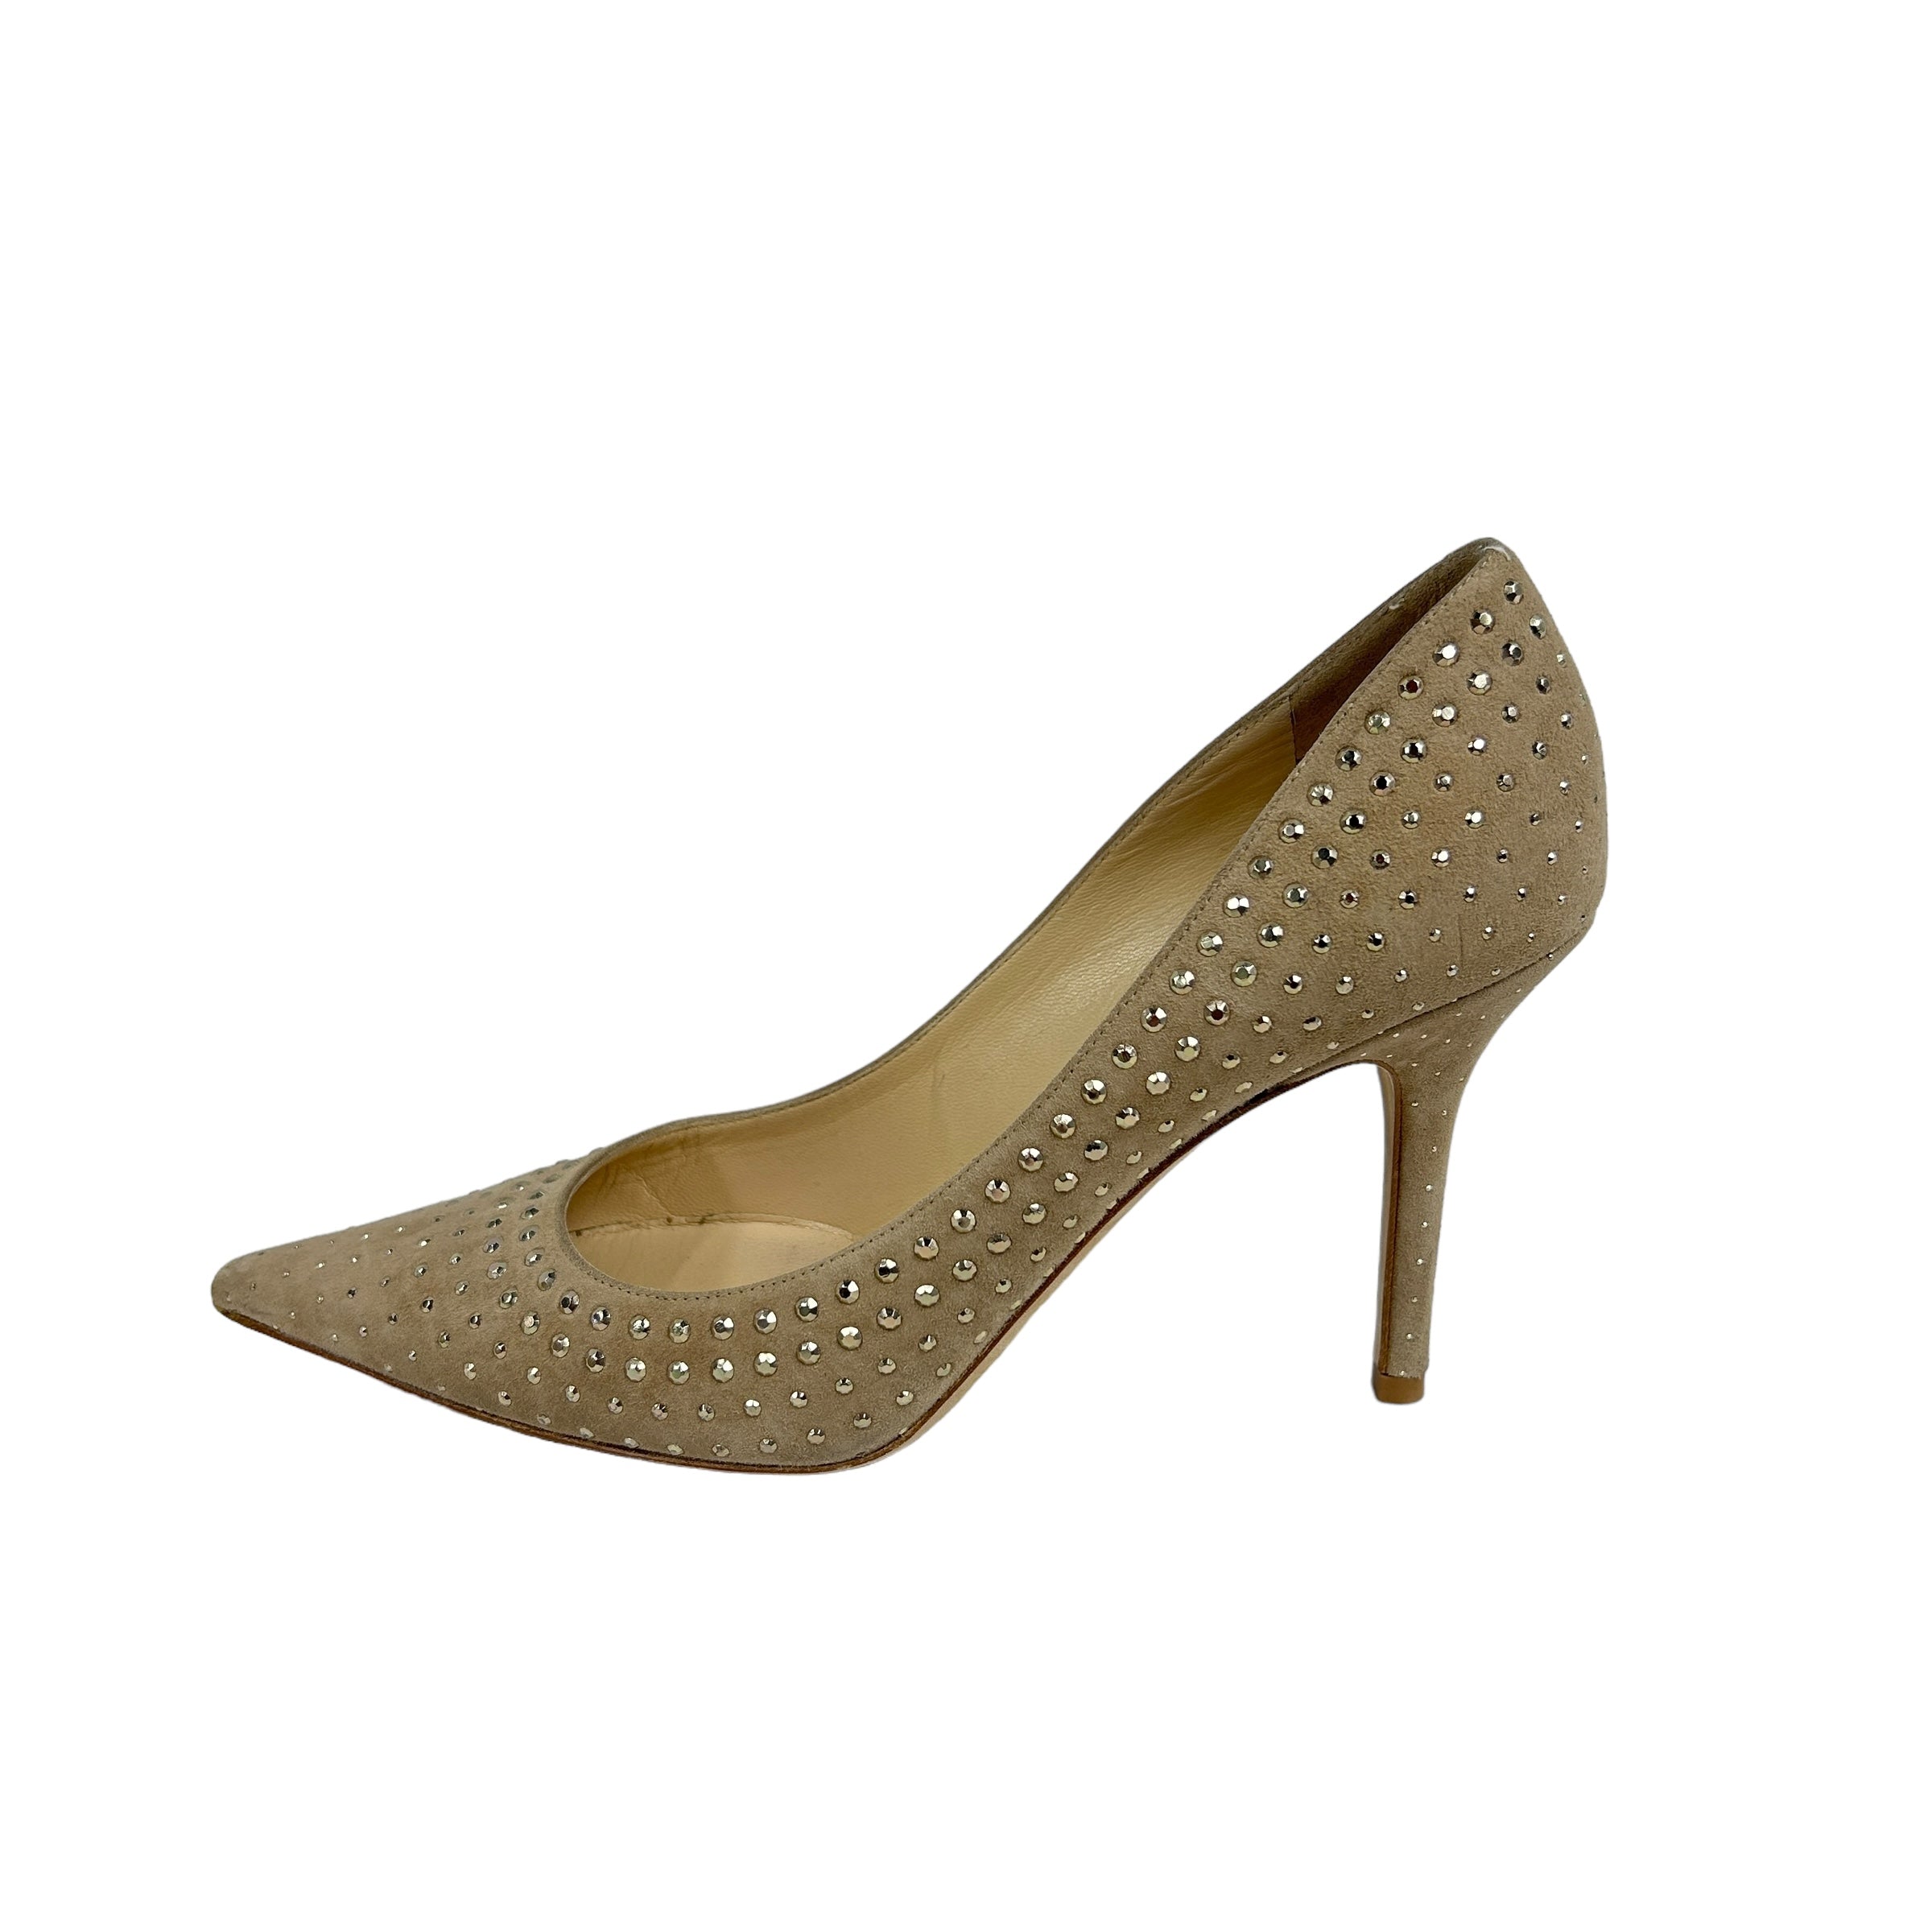 Agmicro Studded Suede Pointed Toe Heel Pumps